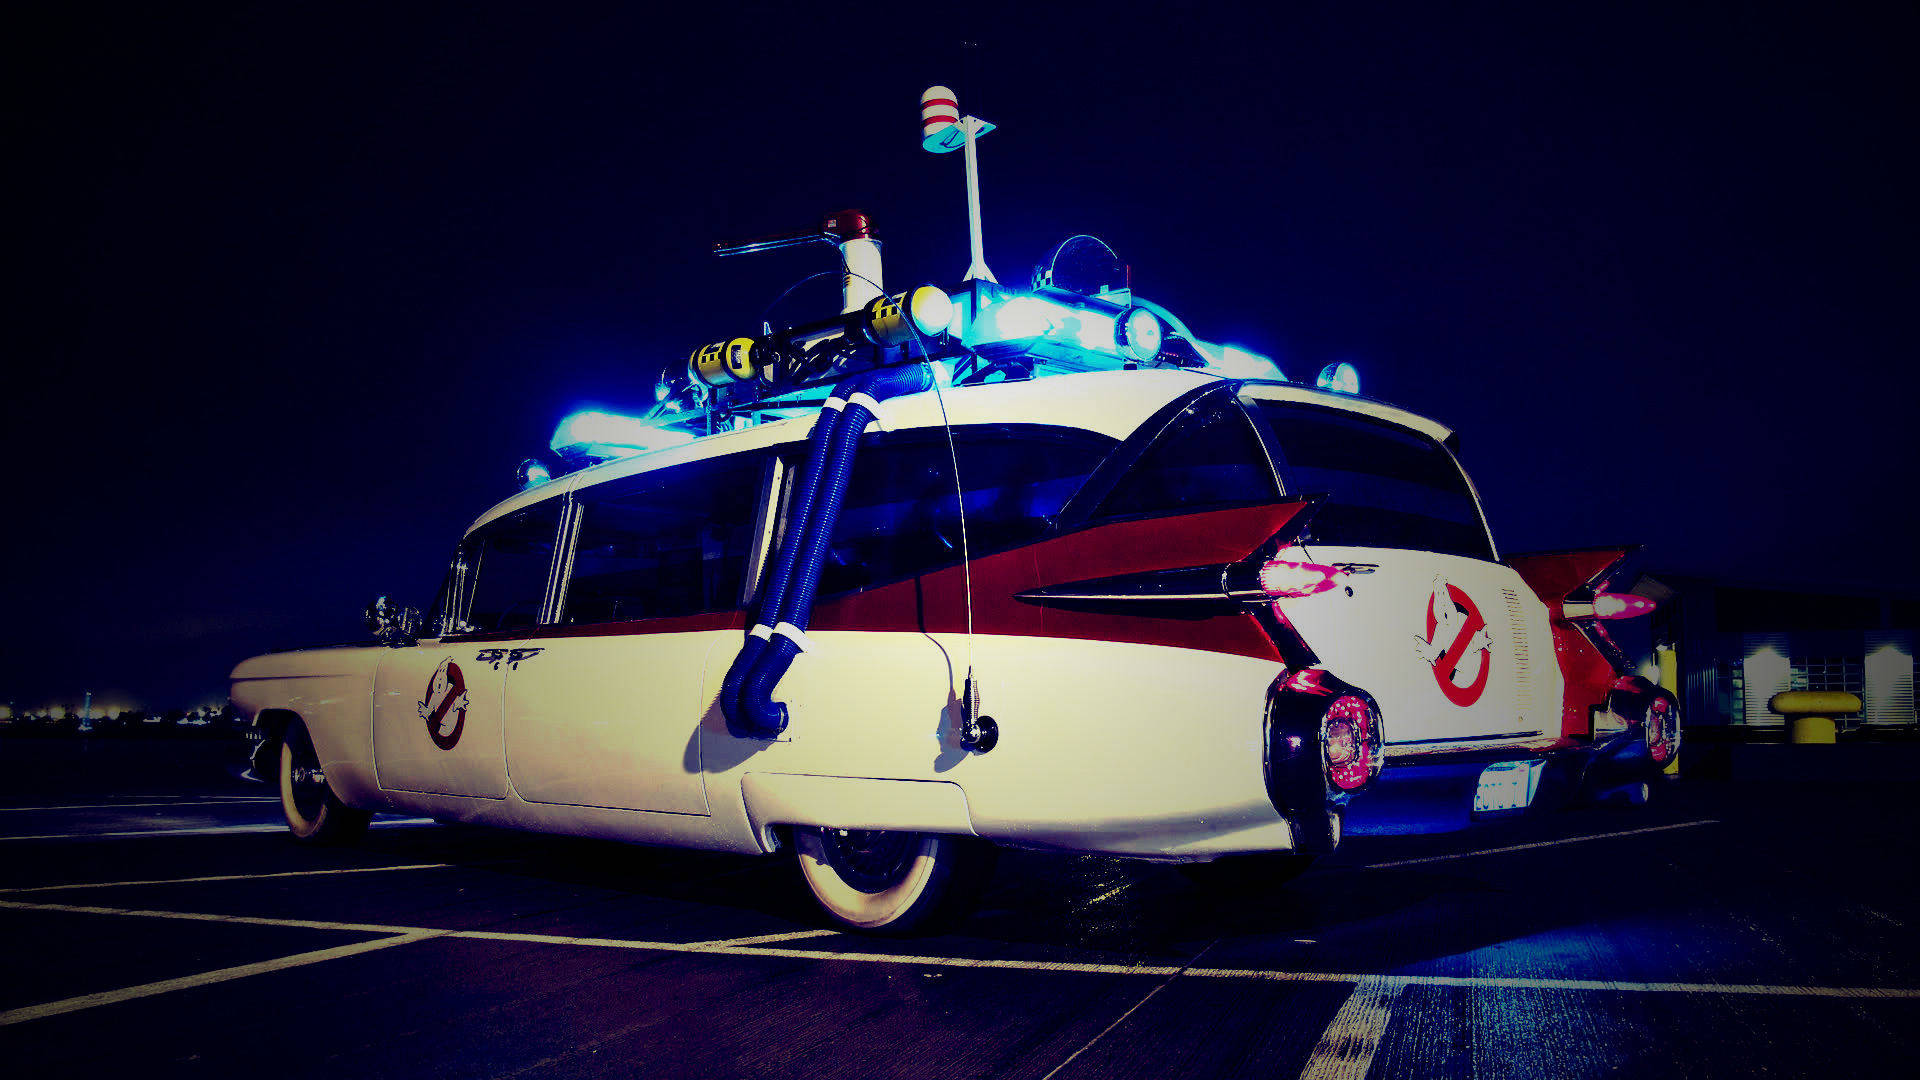 The Legendary Ectomobile Of The Ghostbusters! Background